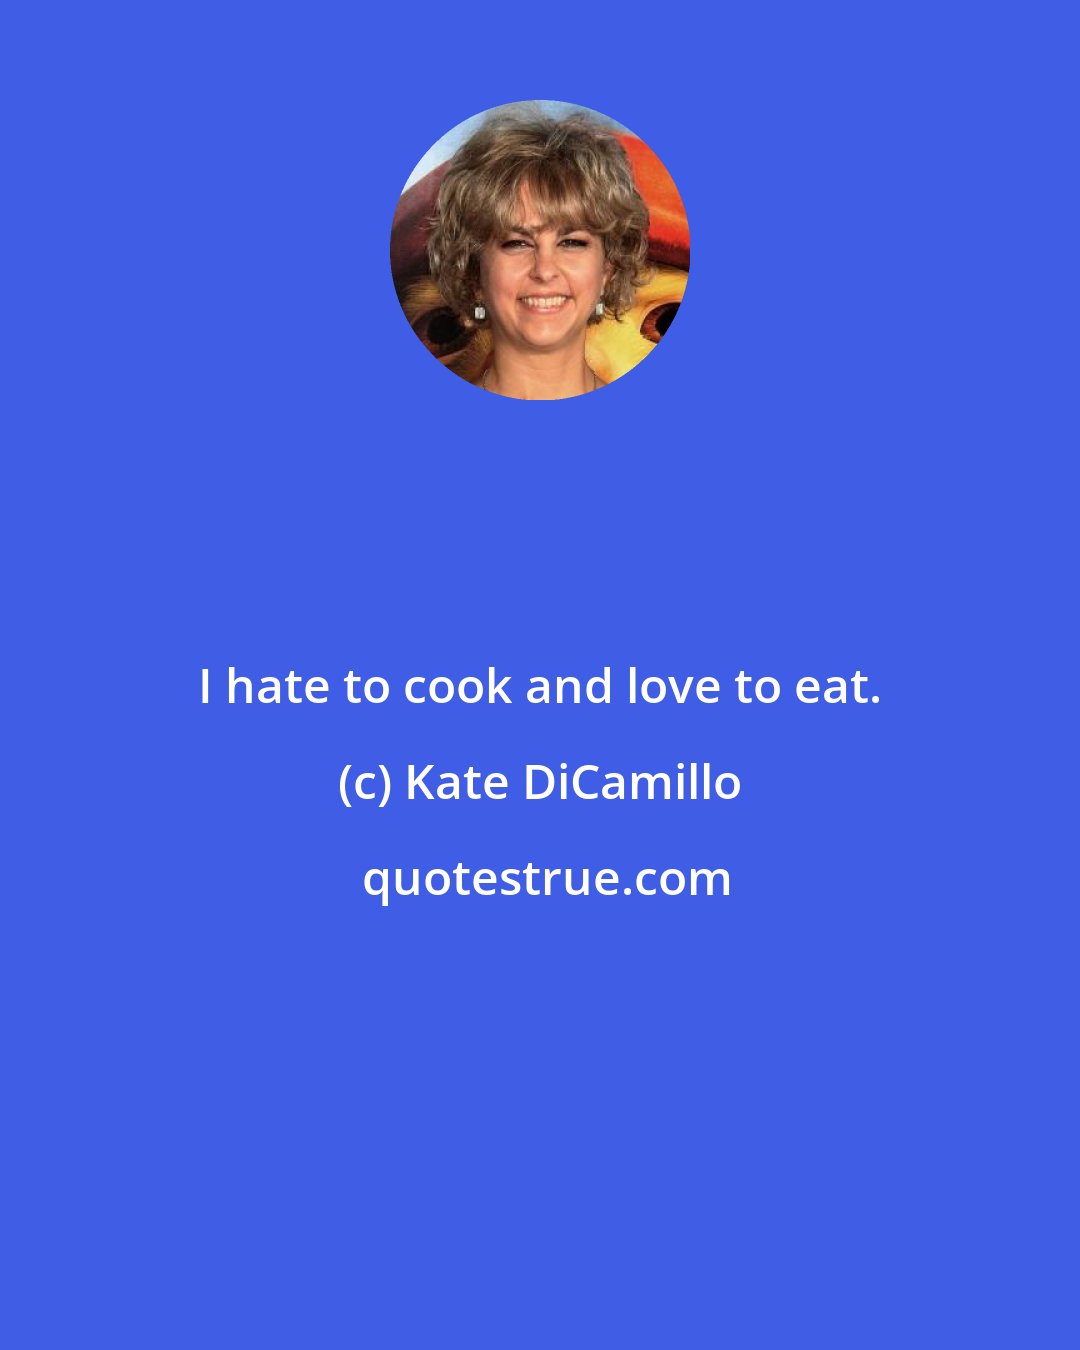 Kate DiCamillo: I hate to cook and love to eat.